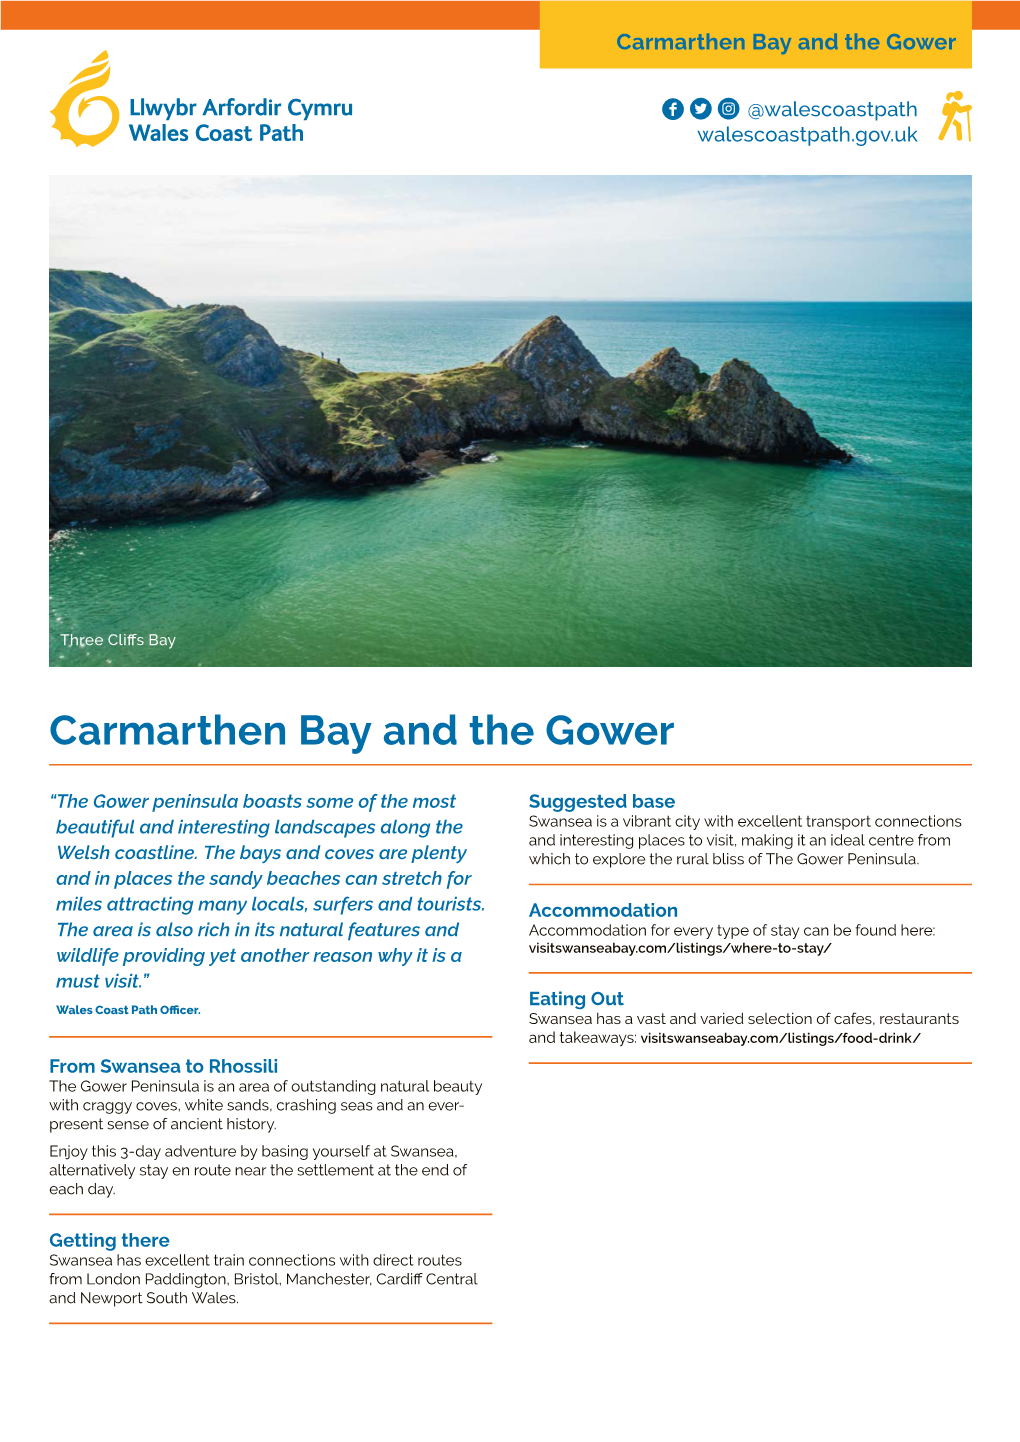 Carmarthen Bay and the Gower